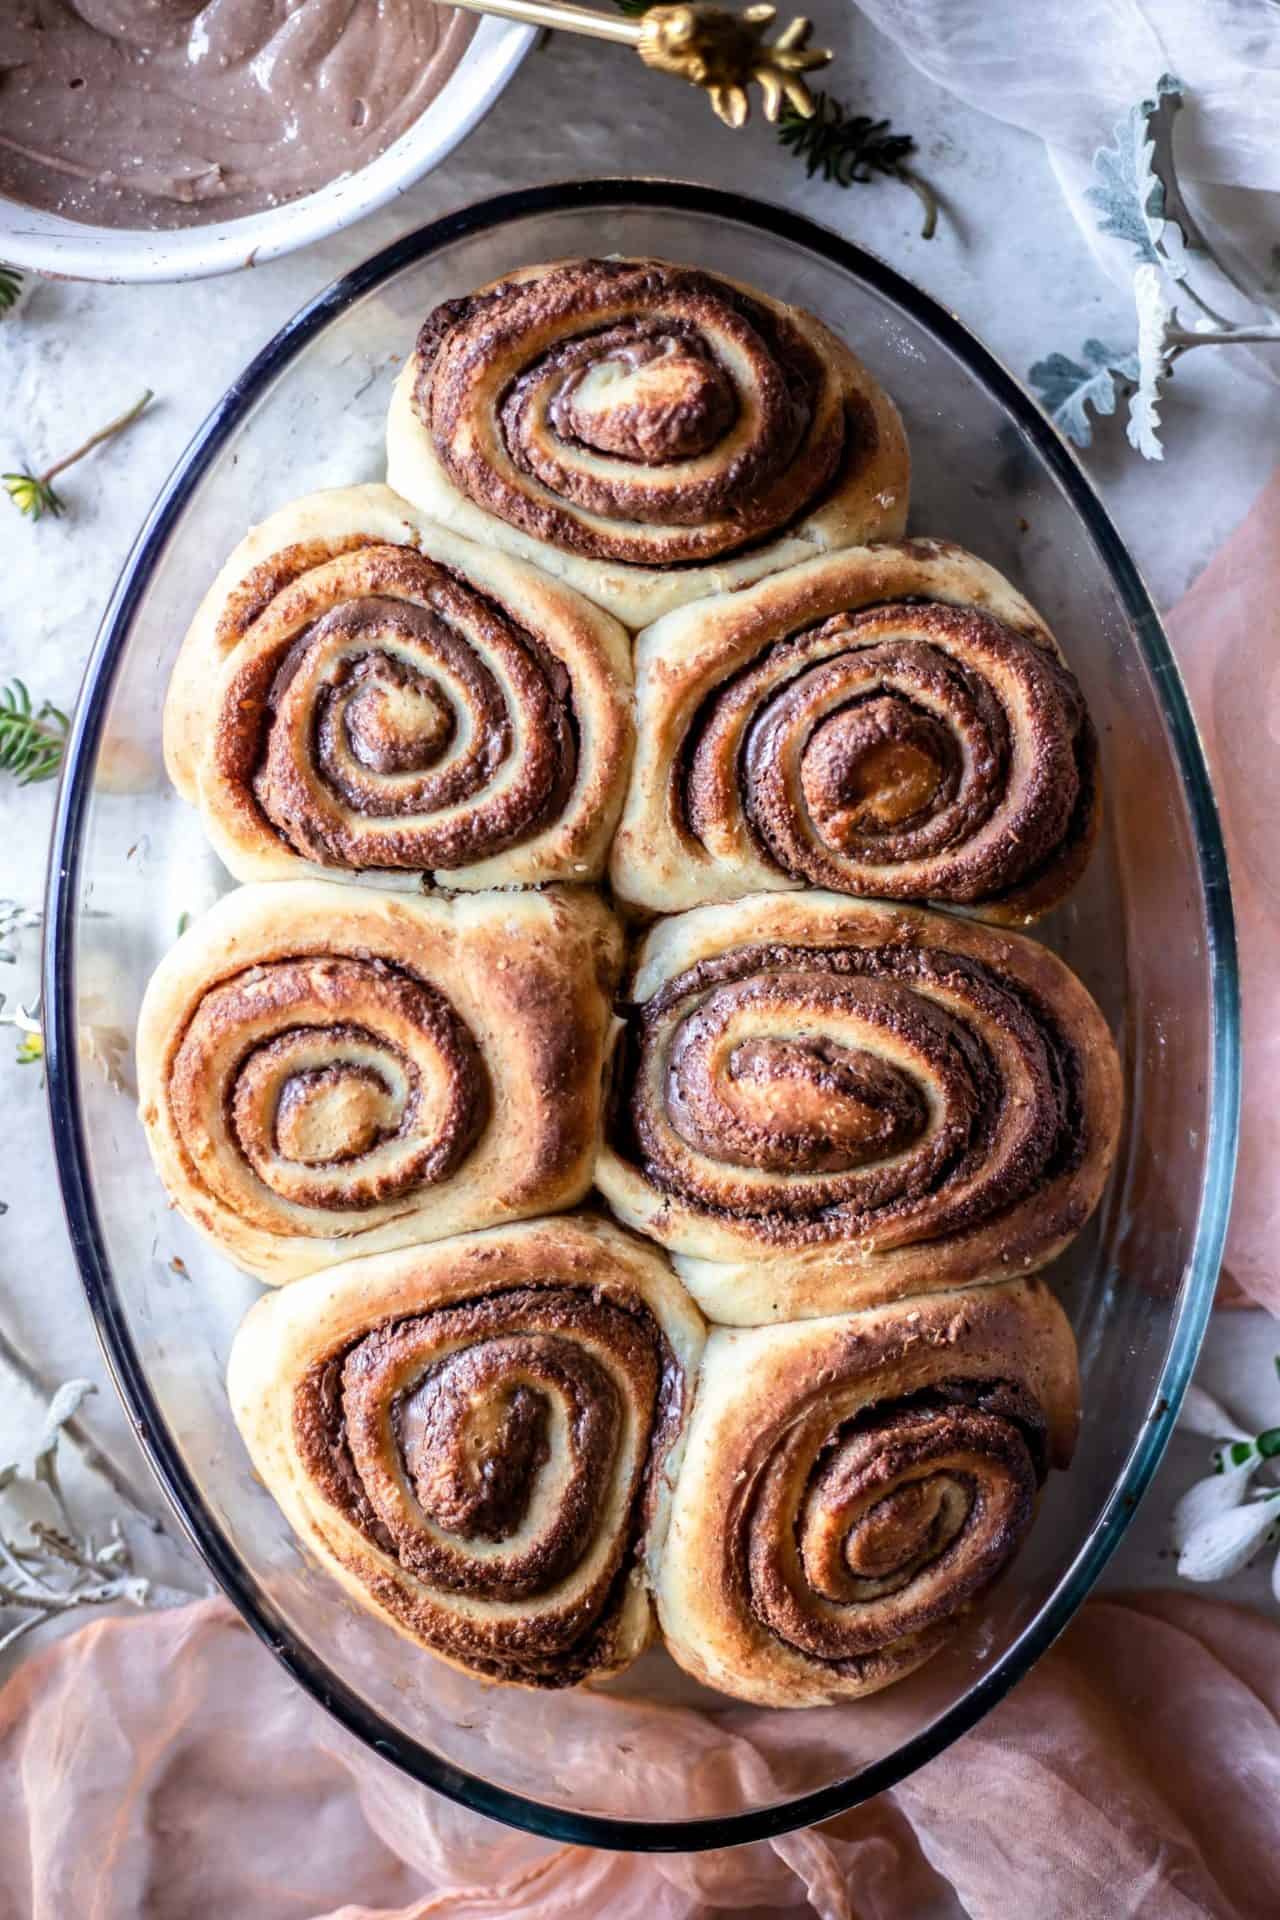 These Gluten-Free Chocolate Rolls are soft, flaky, extra chocolaty, perfectly sweetened, buttery, and super fluffy!